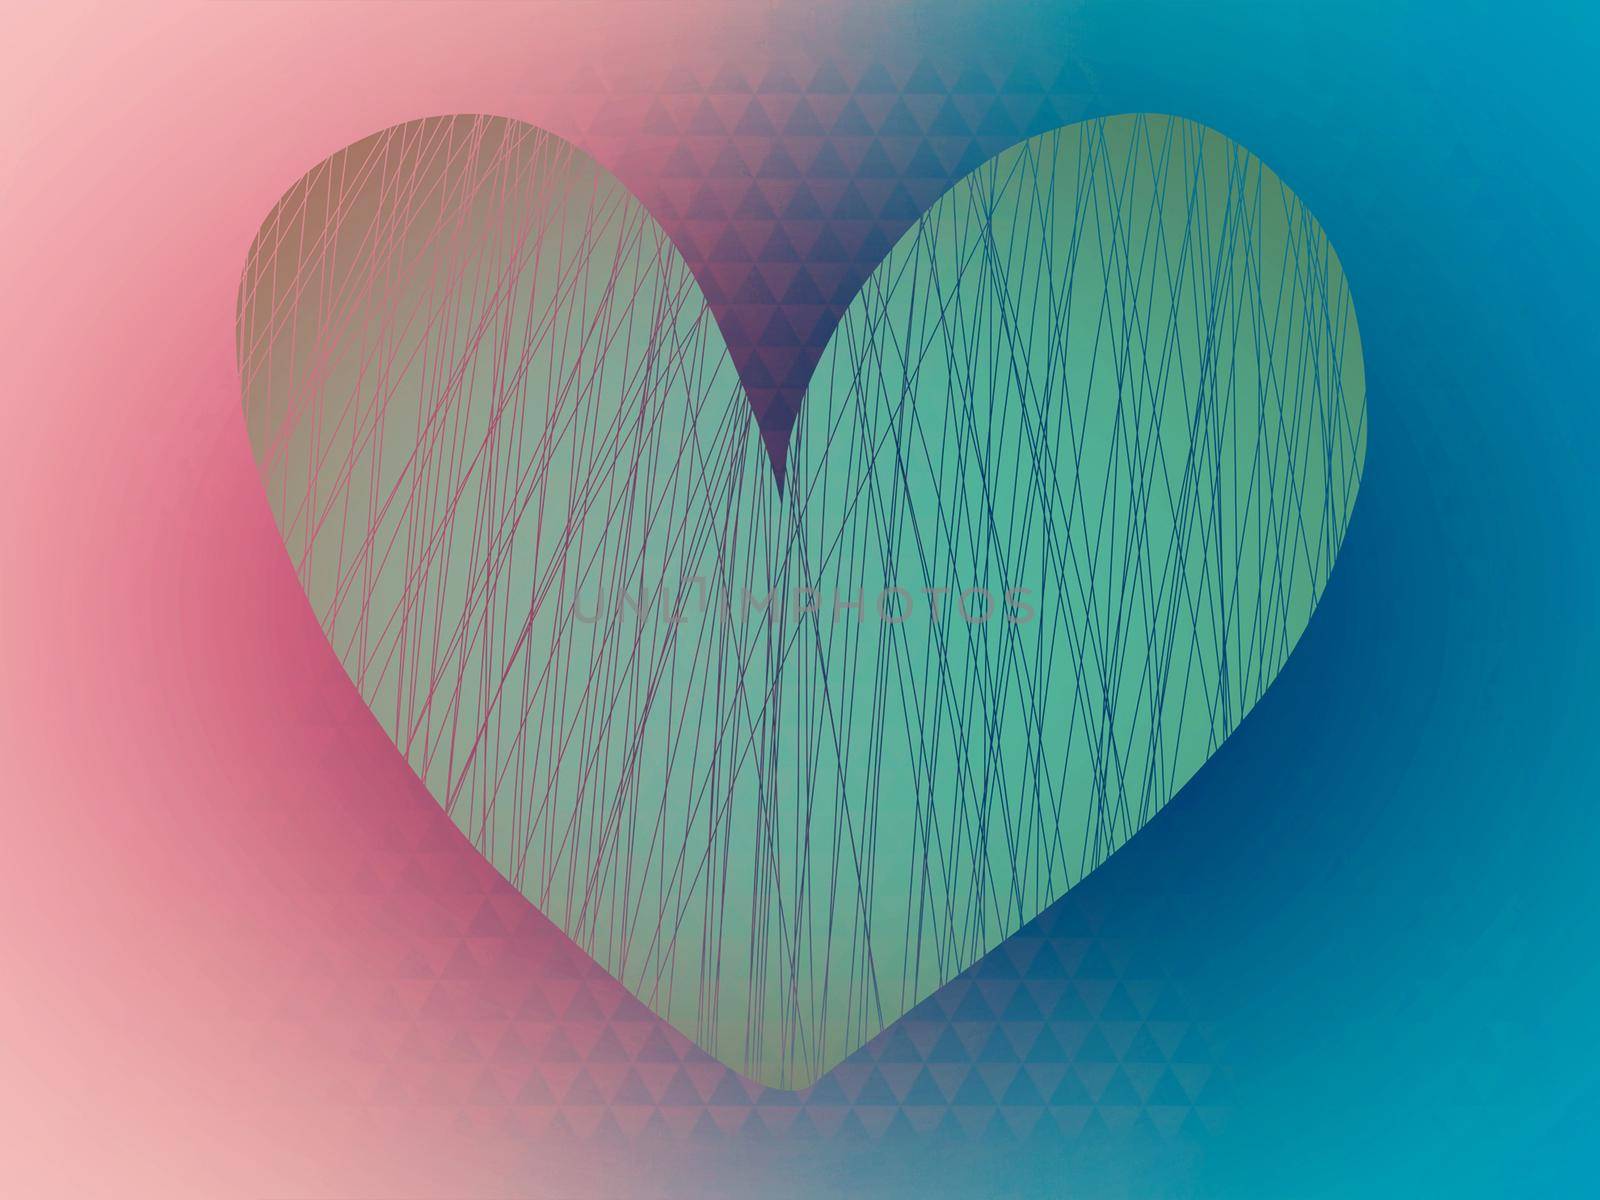 Cute heart on white and blue abstract background illustration